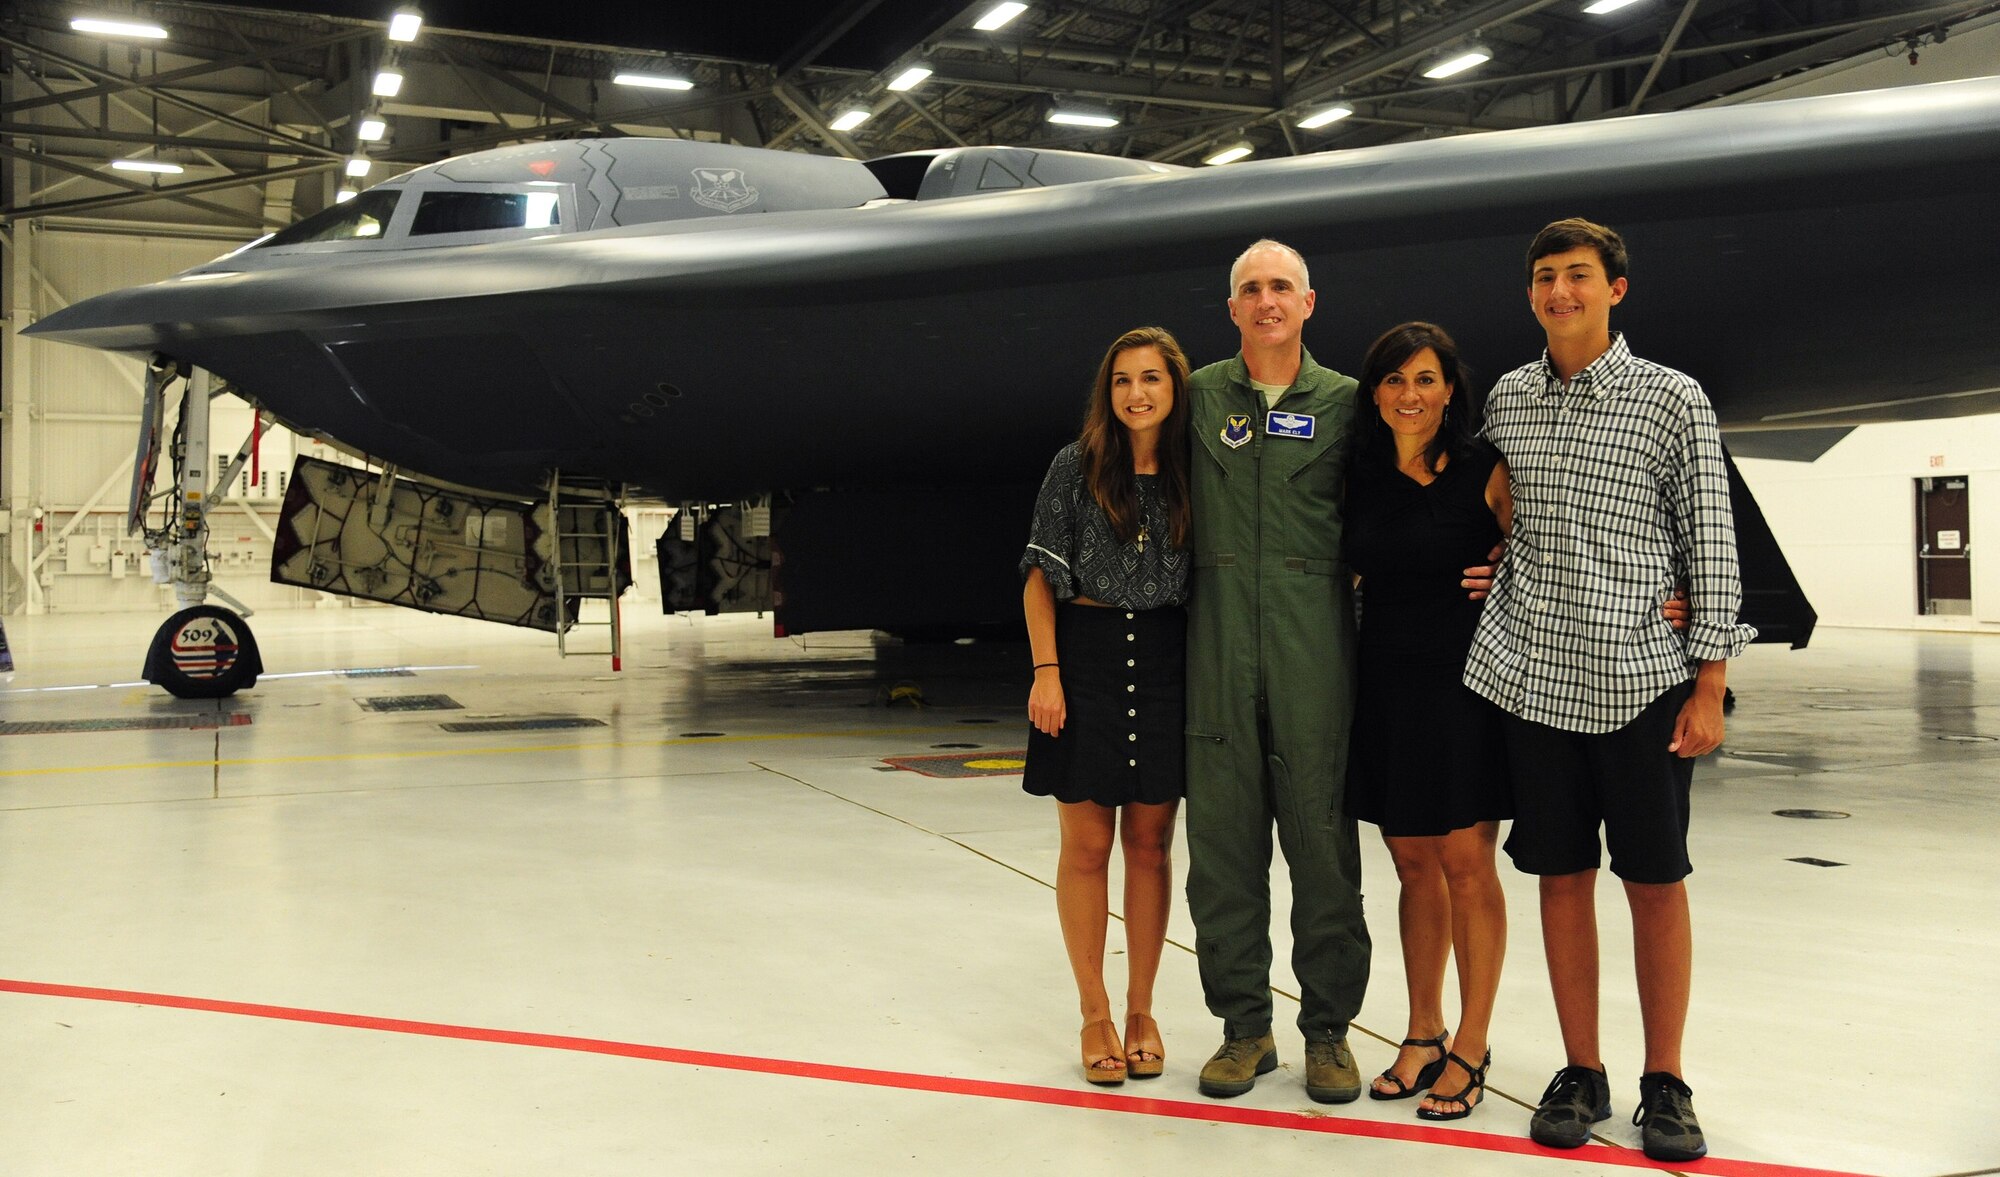 U.S. Air Force Col. Mark Ely, the 509th Bomb Wing vice commander, and his wife Alison, and their children, Leah and Andrew, in front of a B-2 Spirit at Whiteman Air Force Base, Missouri, Aug. 22, 2016. Ely has served in the Air Force for 26 years and he is a command pilot with more than 3,530 flying hours, including more than 200 combat hours.